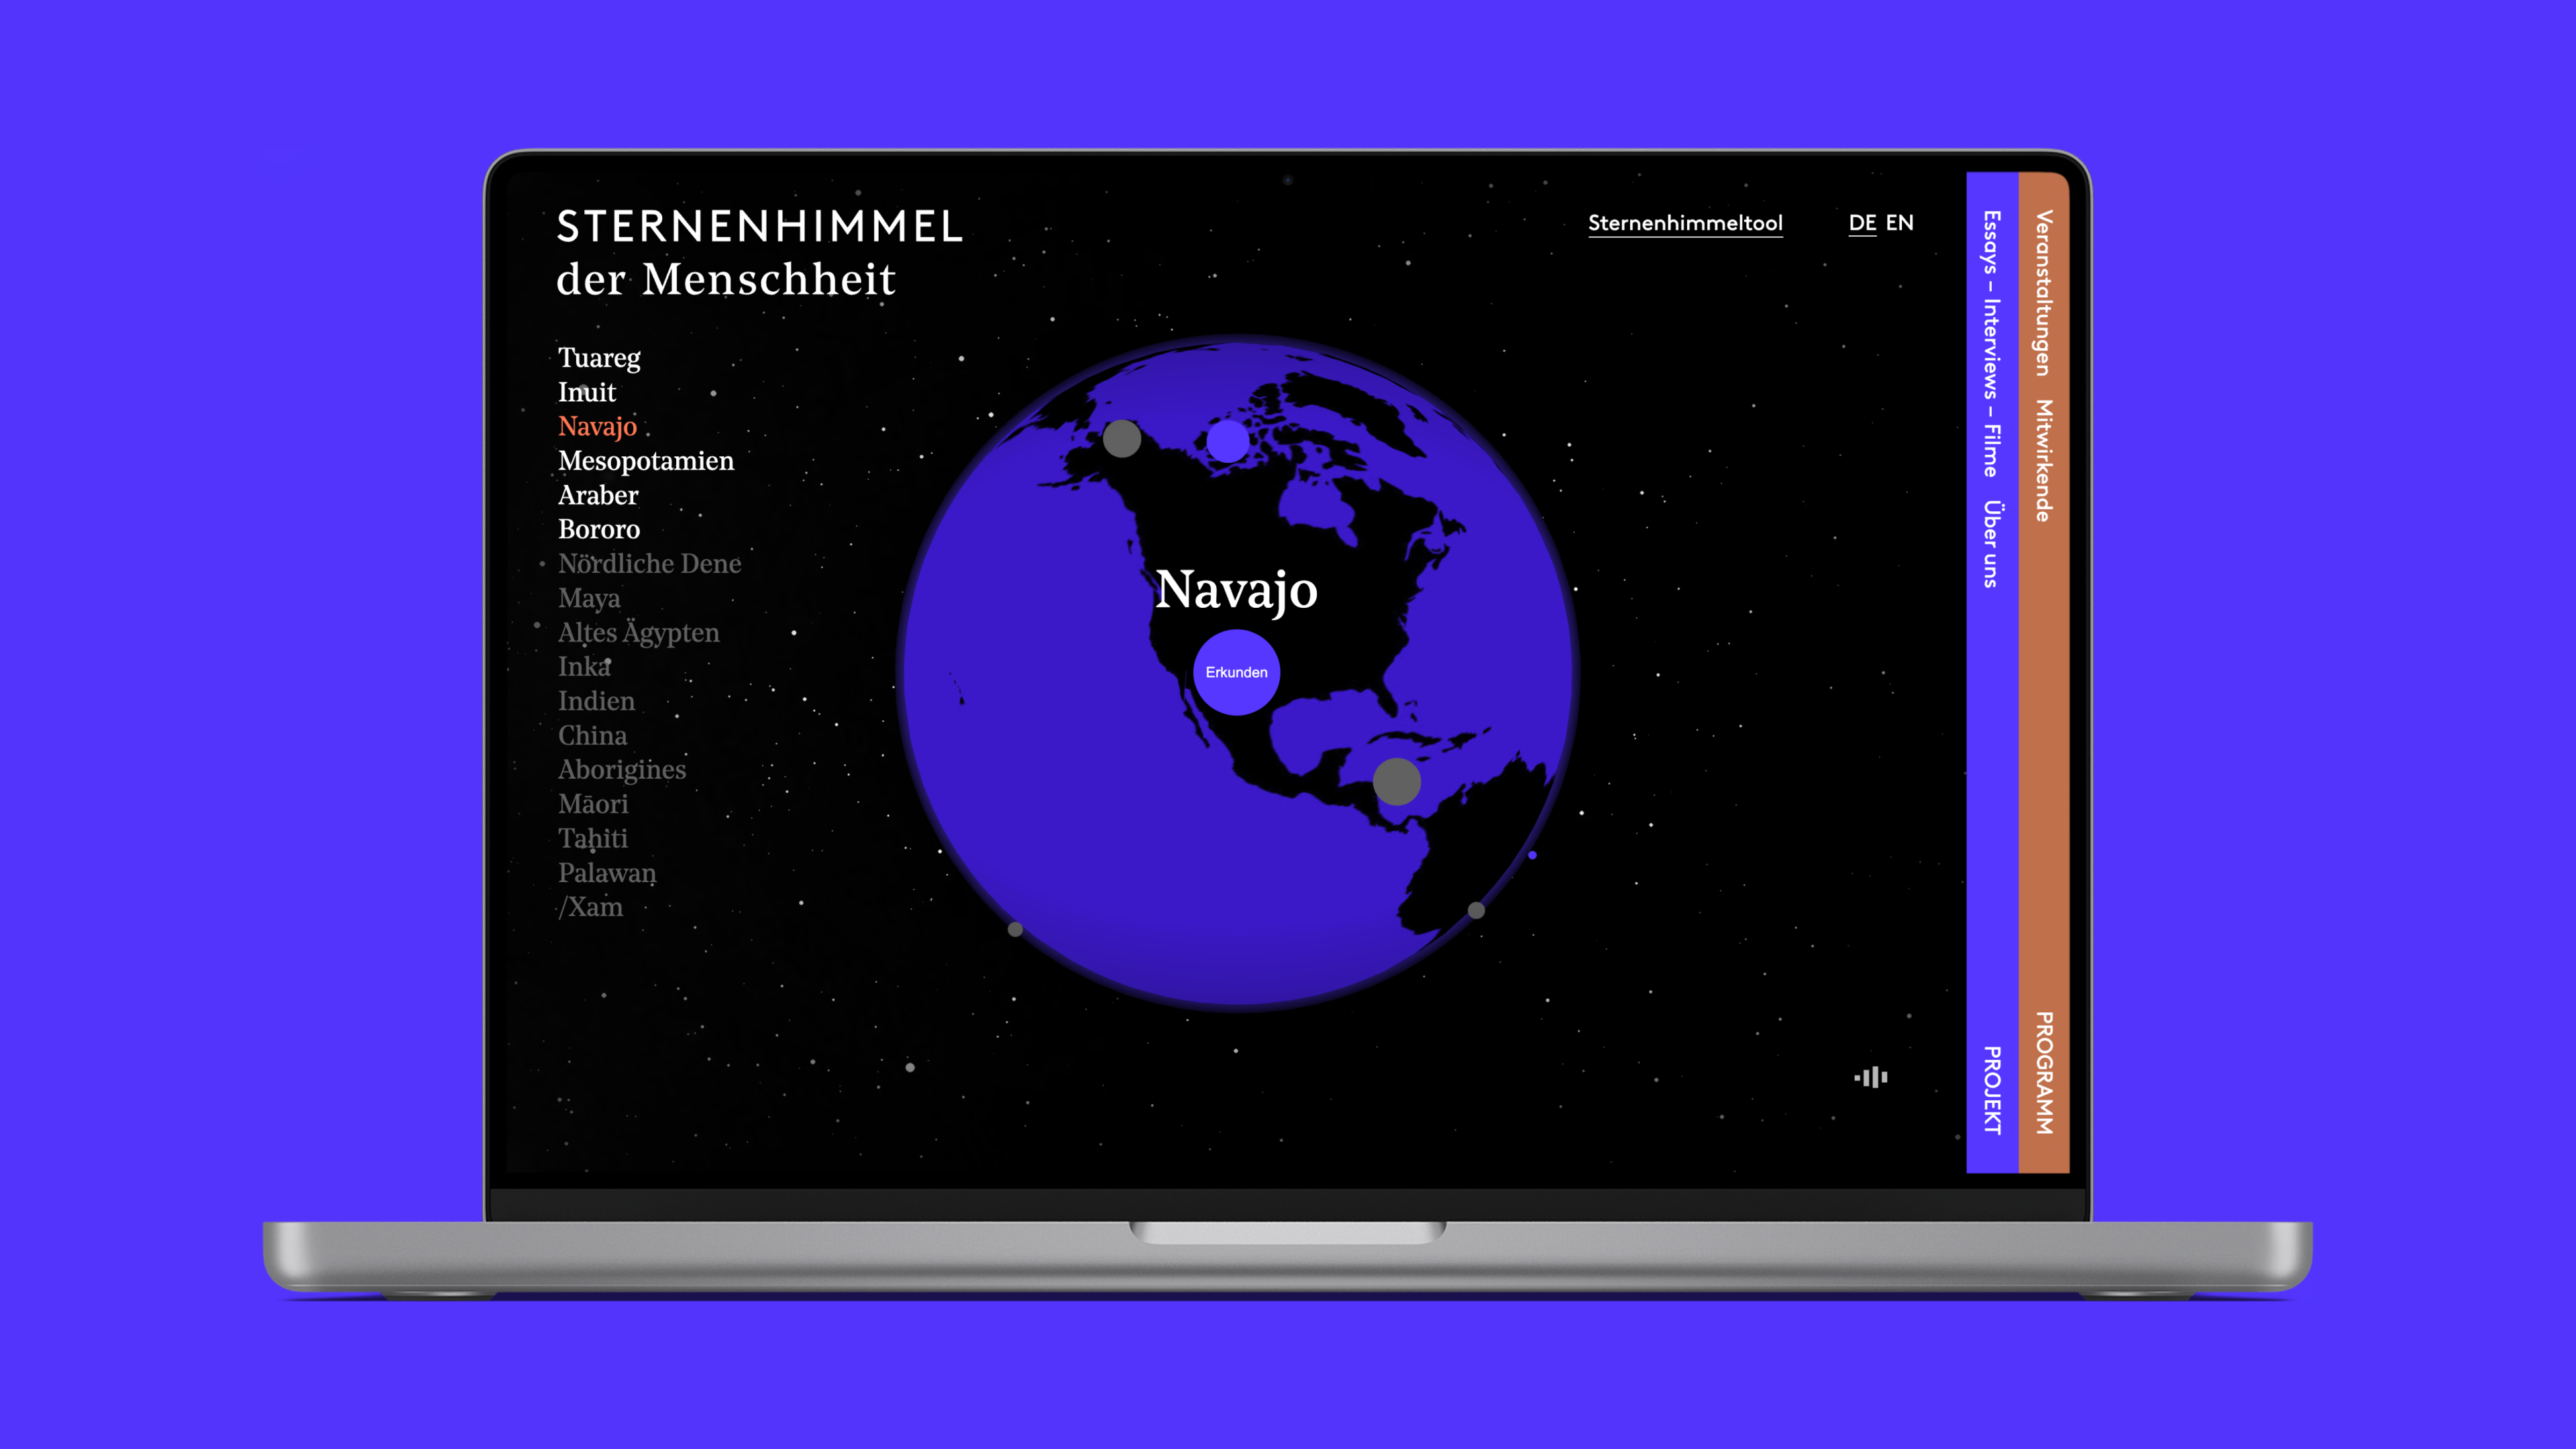 A laptop screen displaying the “Heavens of Mankind” webpage. It’s a digital exploration of the celestial narratives of various cultures, featuring a world map and a list of diverse cultural interpretations of the cosmos.